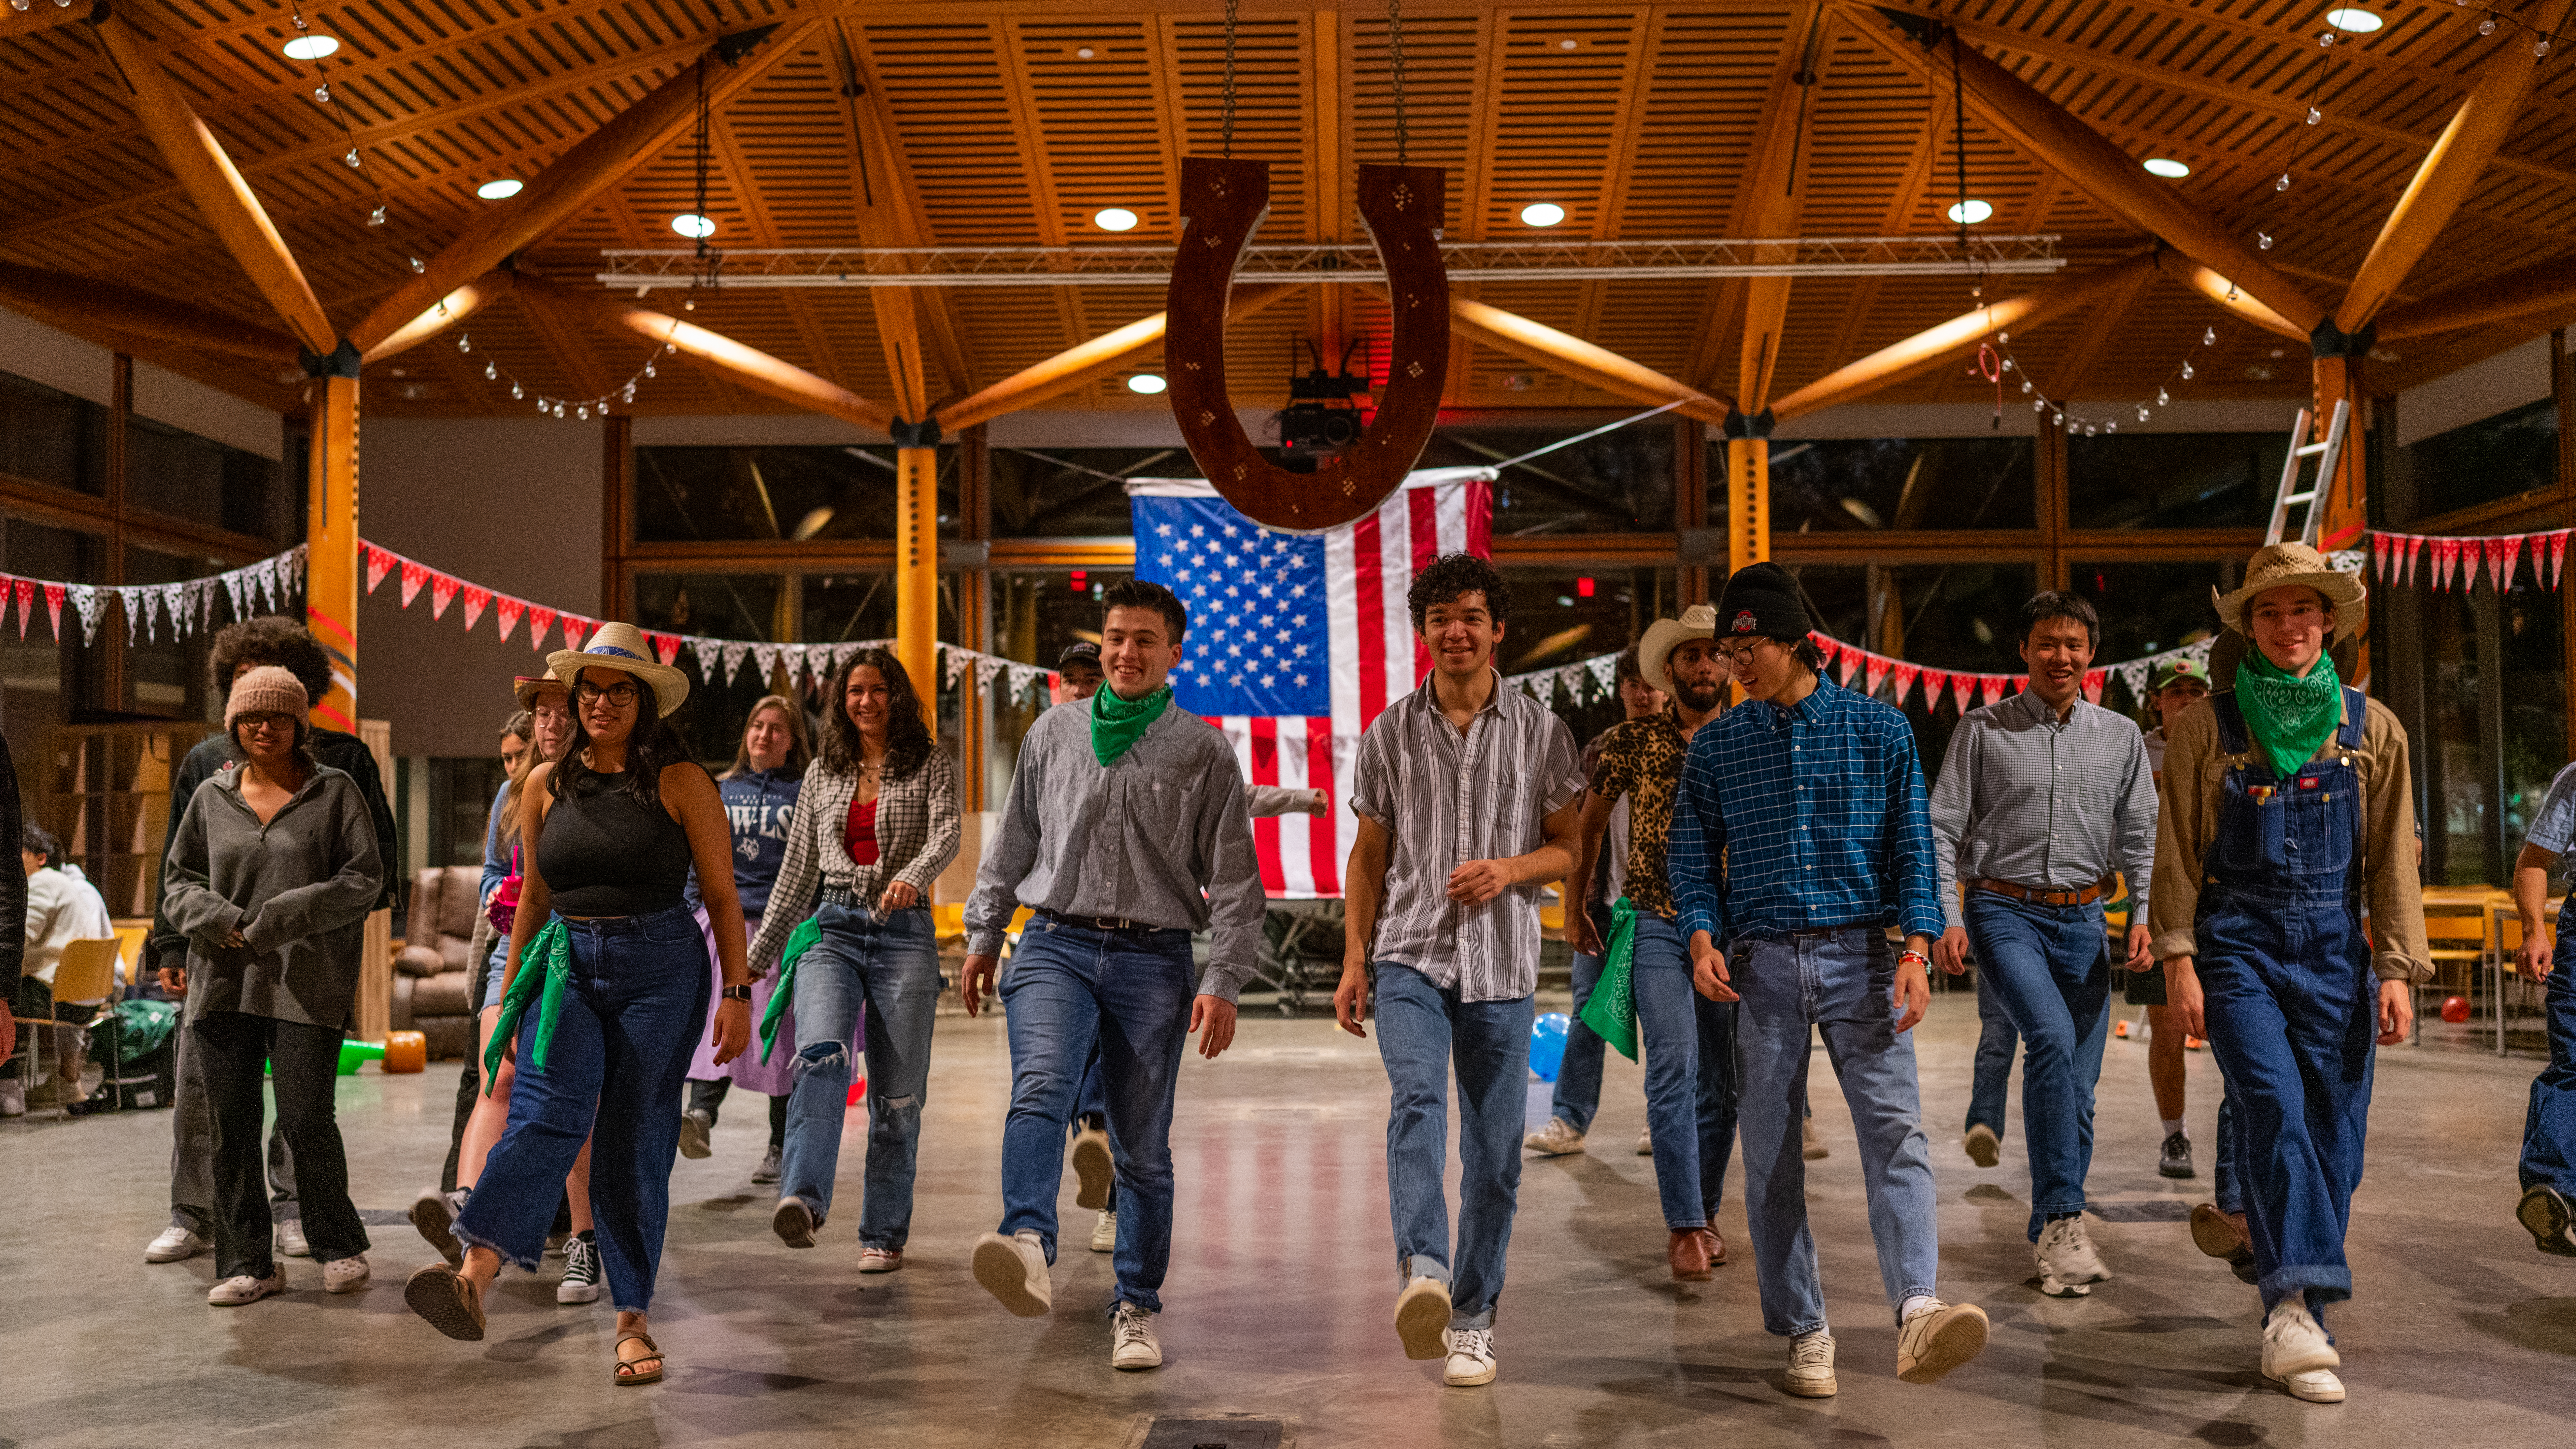 A group of students wearing country-style outfits, performing a line dance and kicking one foot up.